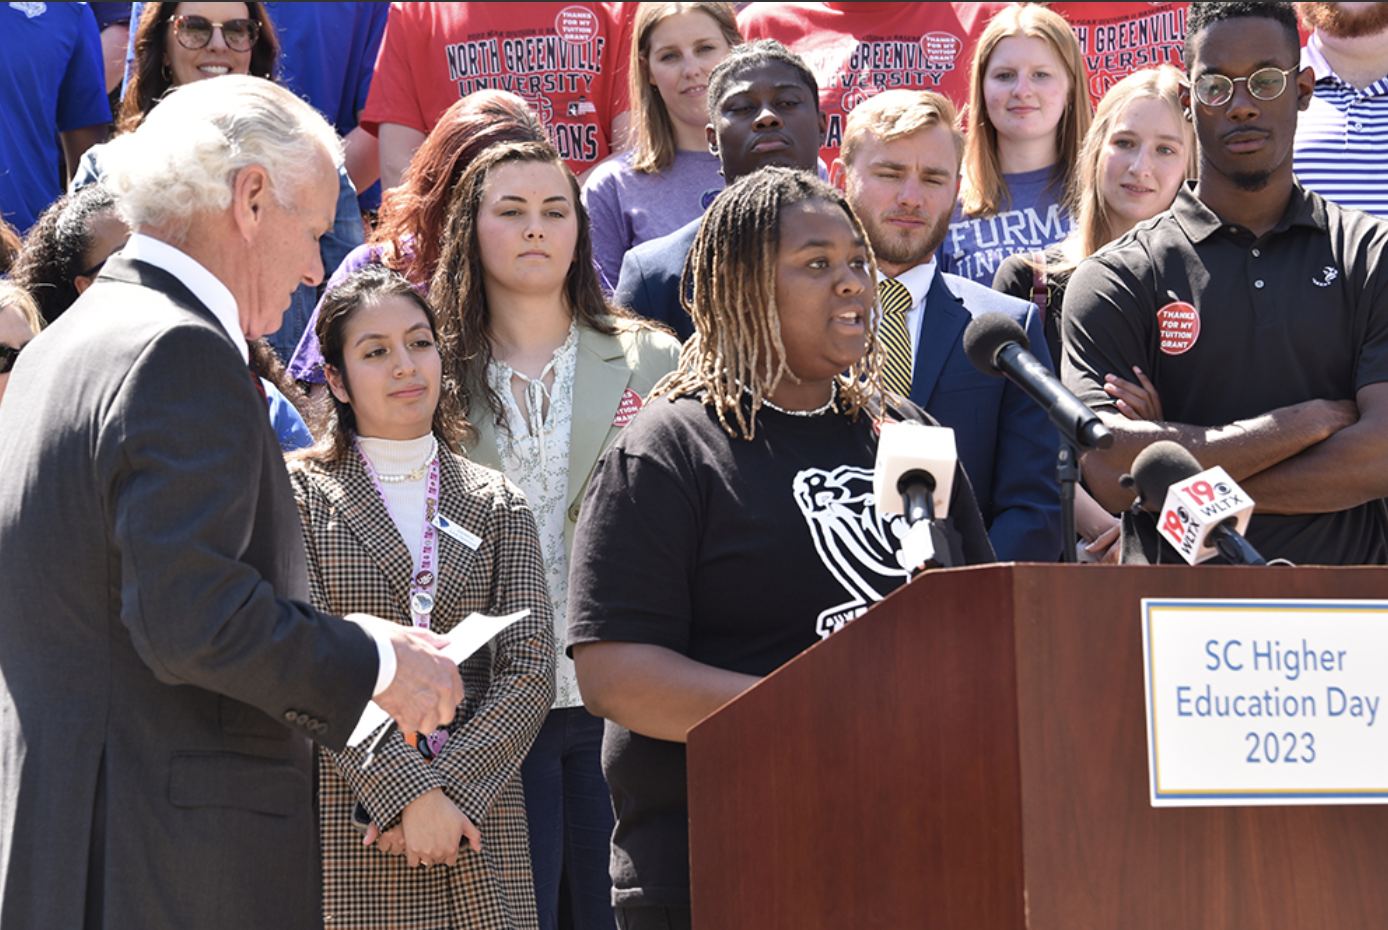 Kylah Montgomery (standing behind podium) shared with Gov. McMaster (left), members of the General Assembly, fellow S.C. higher education students (in audience), and the media the importance of the Tuition Grants program to her education at Benedict College.